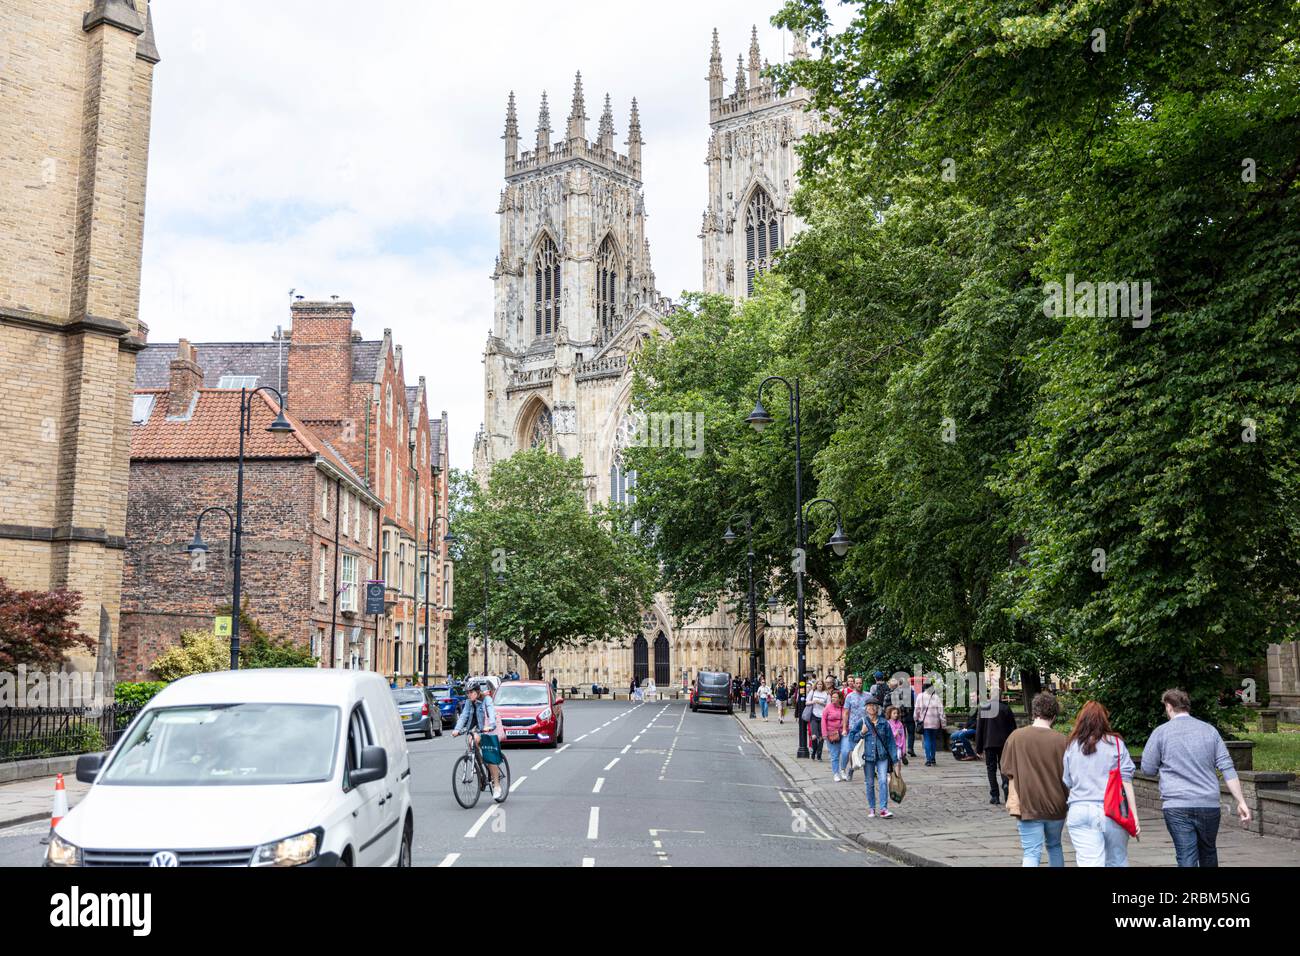 York Minster Cathedral, York, Yorkshire, UK, England, mediaeval,minster,cathedral,uk,england,history,historic, buildings,architecture,architectural, Stock Photo